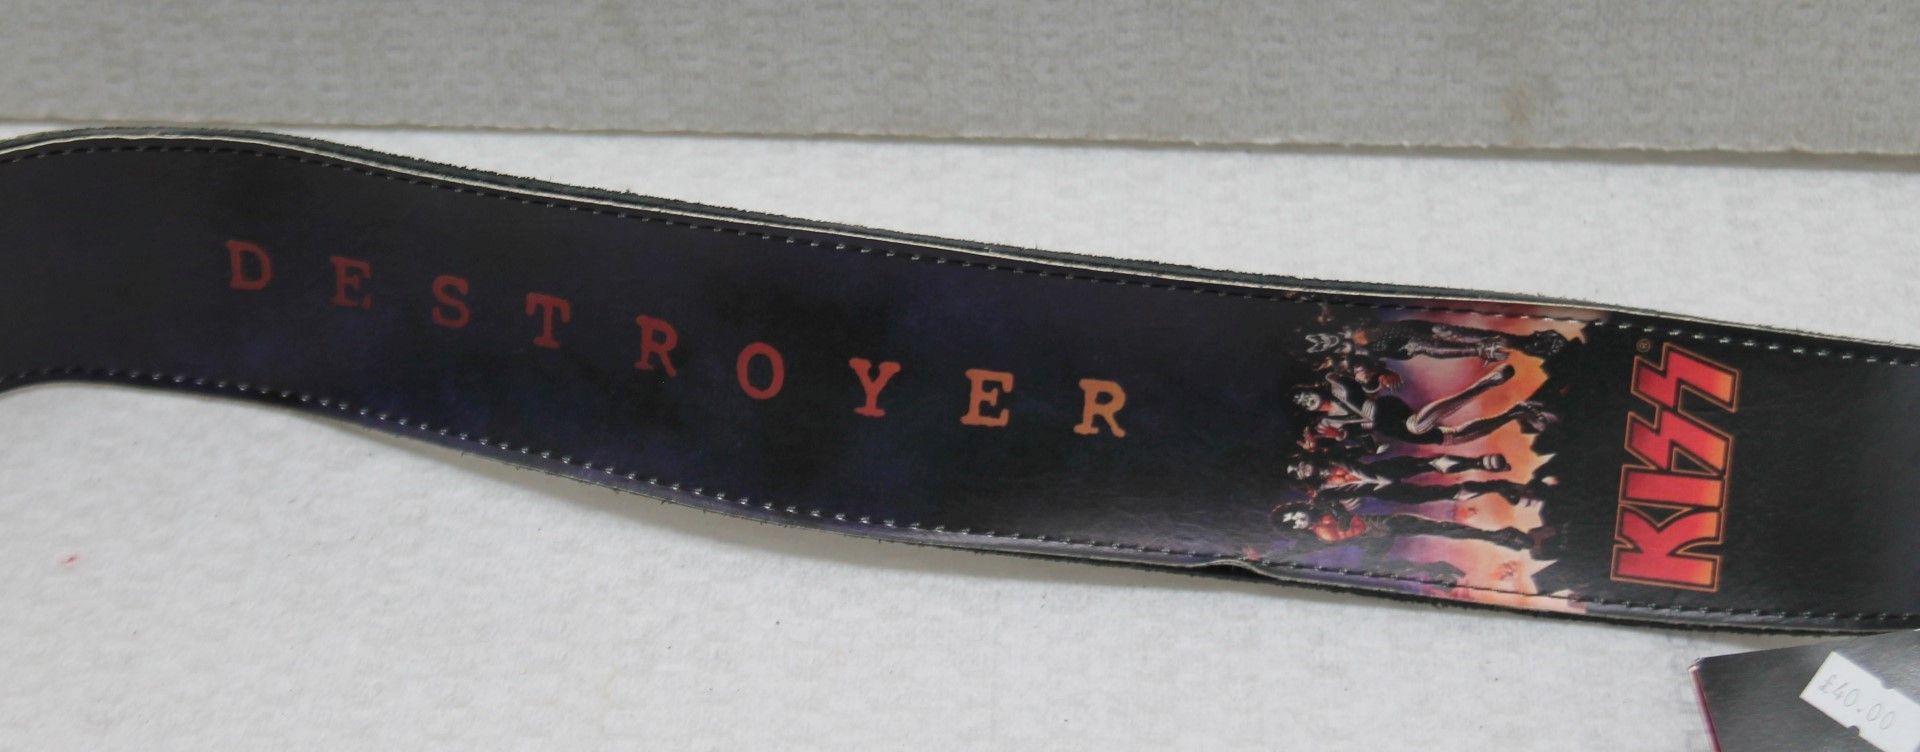 1 x Kiss Leather Guitar Strap by Perri's - Officially Licensed Merchandise - RRP £40 - New & Unused - Image 2 of 7